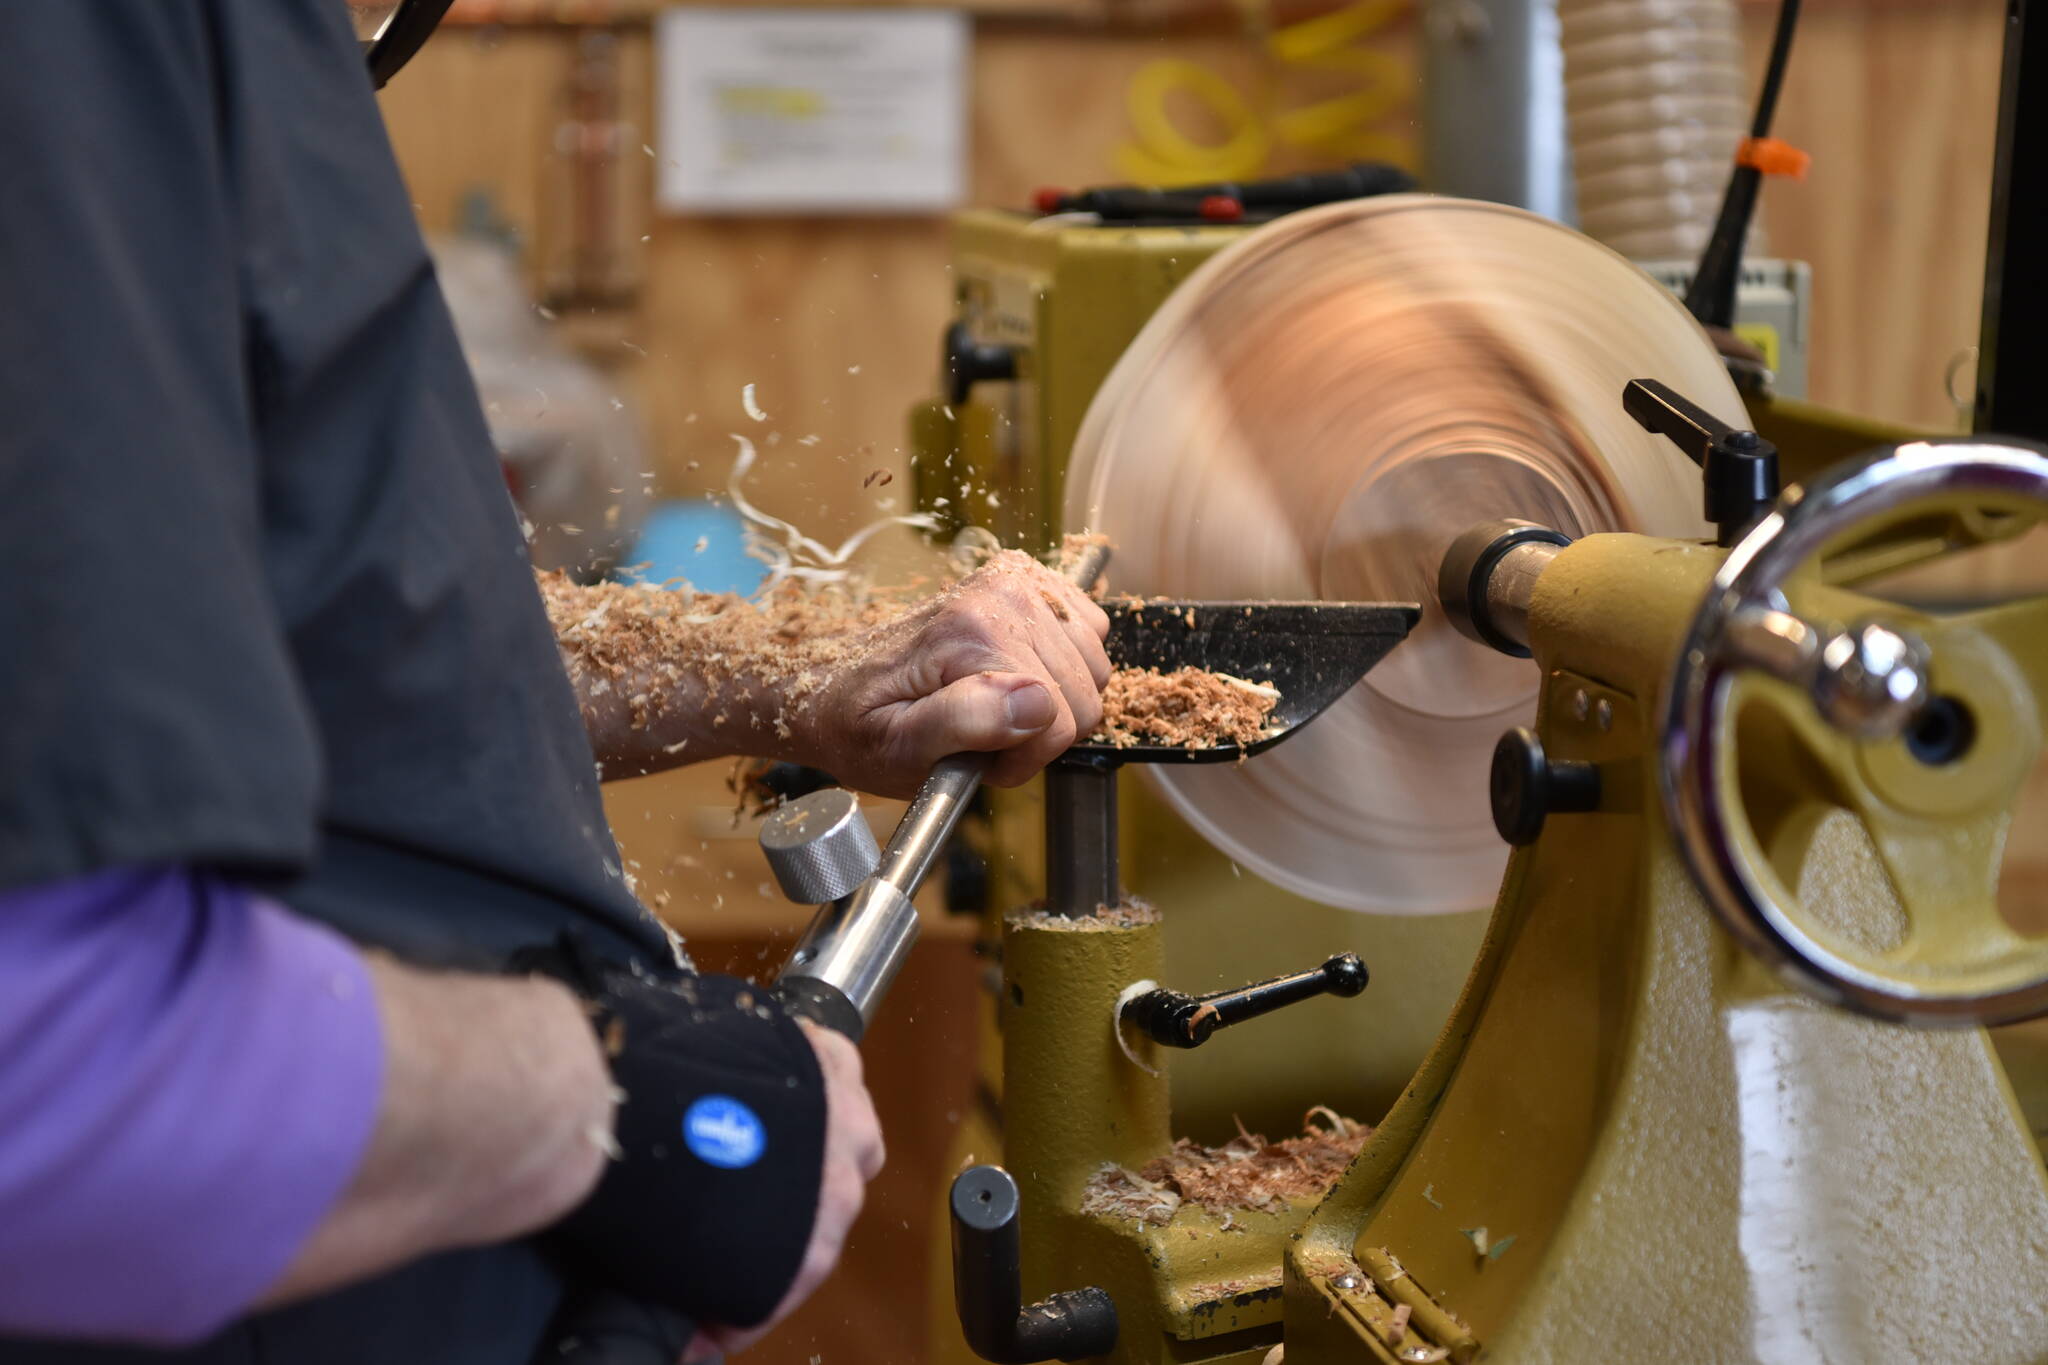 Wood shavings fly as a BARN member carves using a lathe in the wood shop.